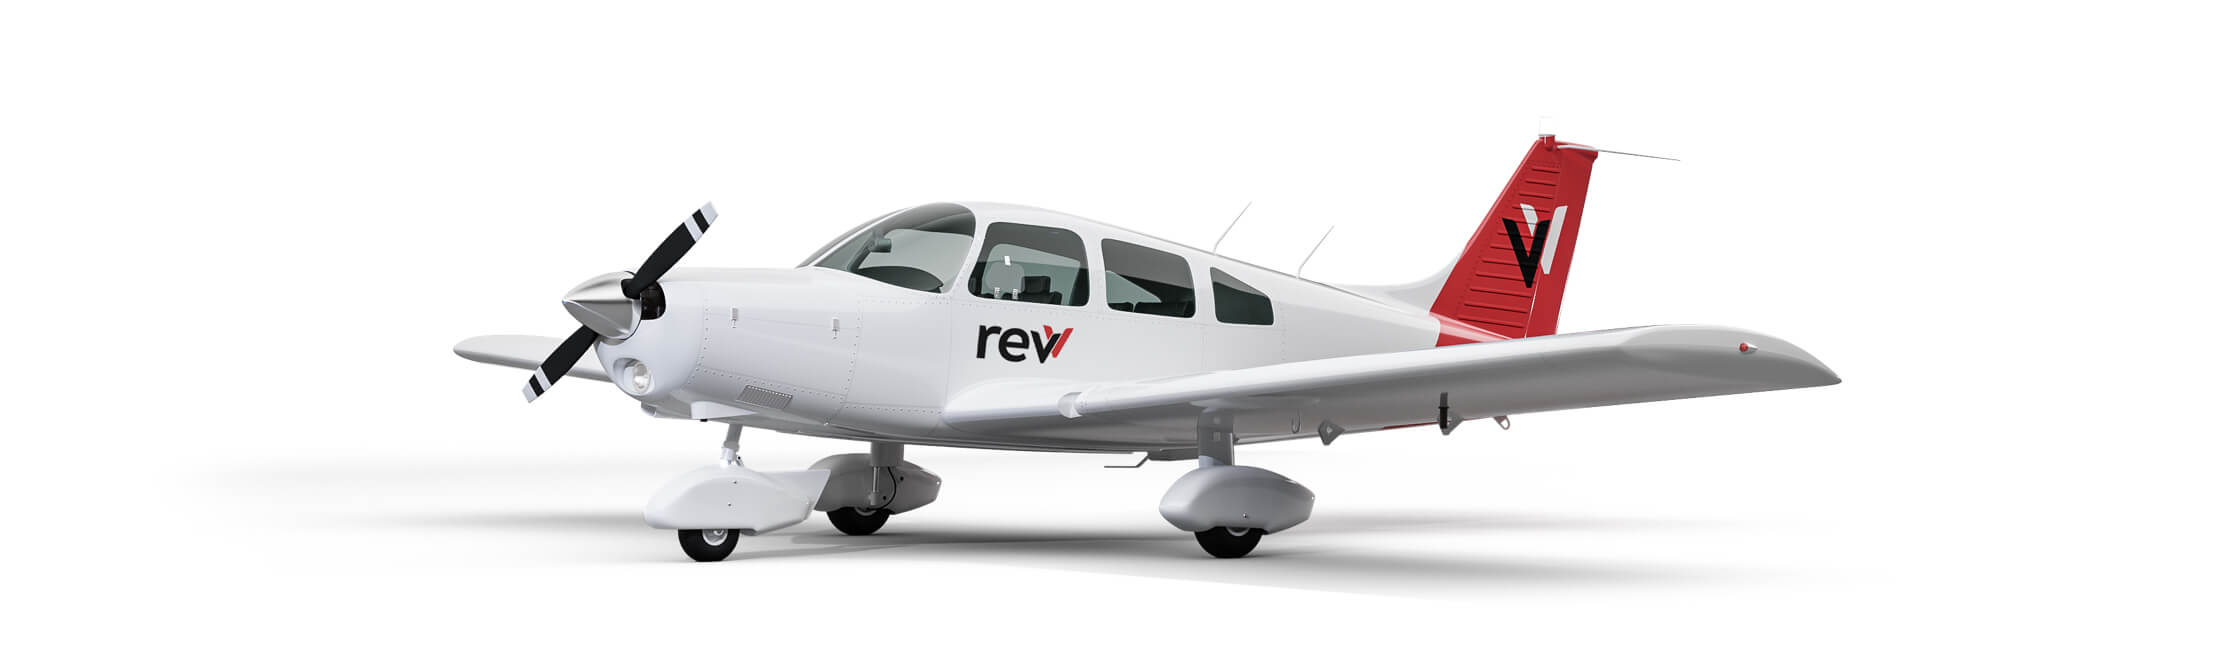 Piper Warrior airplane branded with revv logo